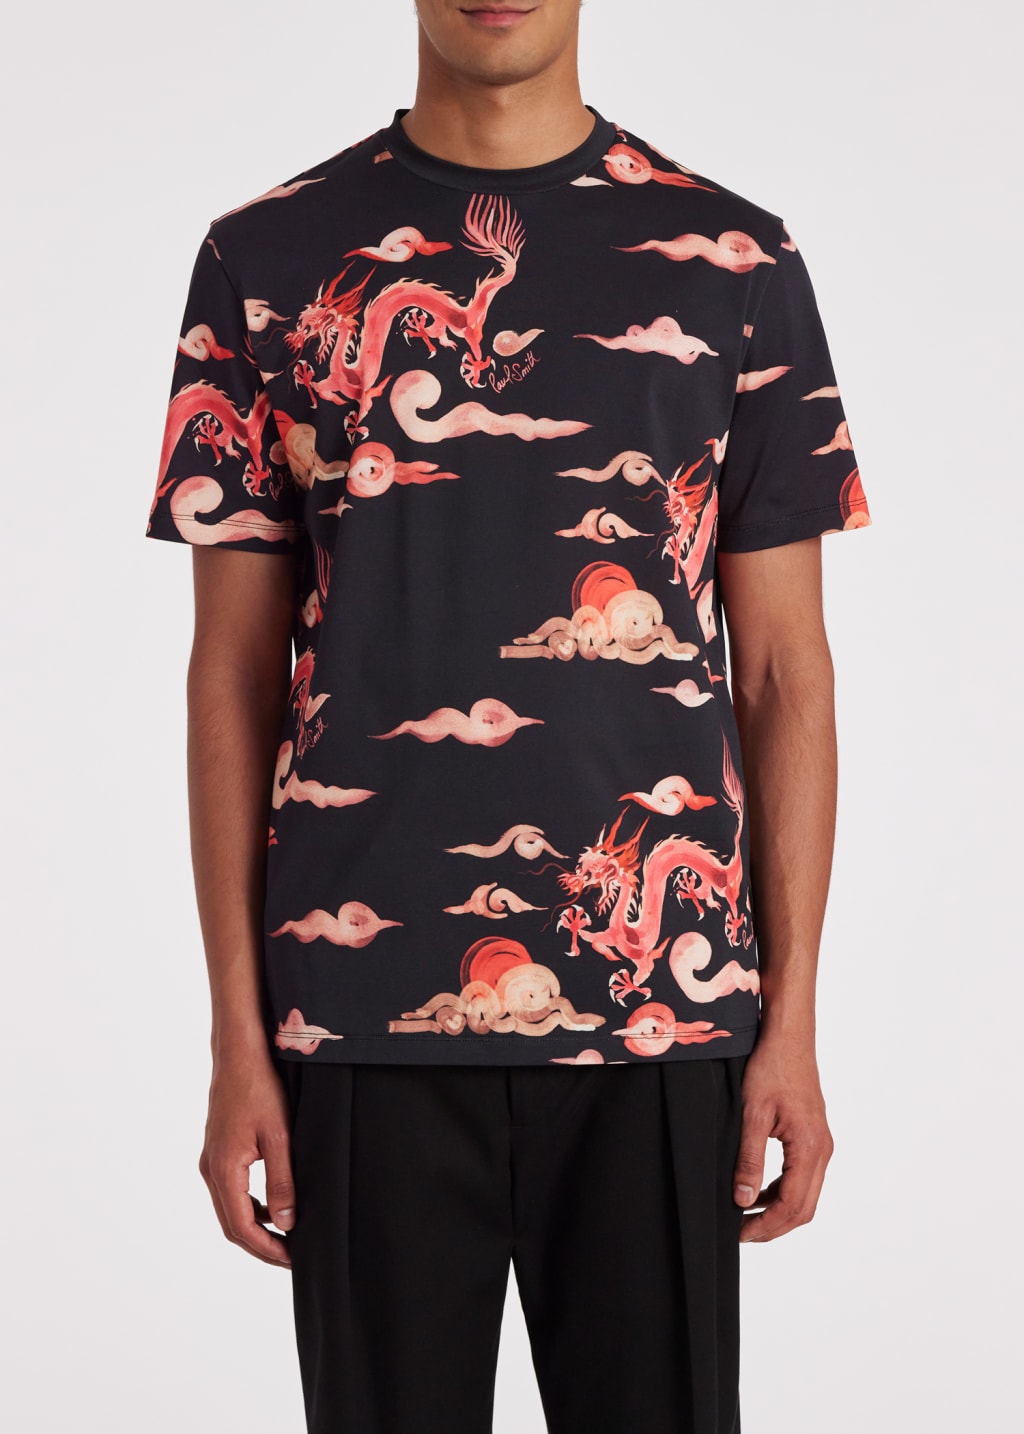 Model View - Black 'Year Of The Dragon' Cotton T-Shirt Paul Smith